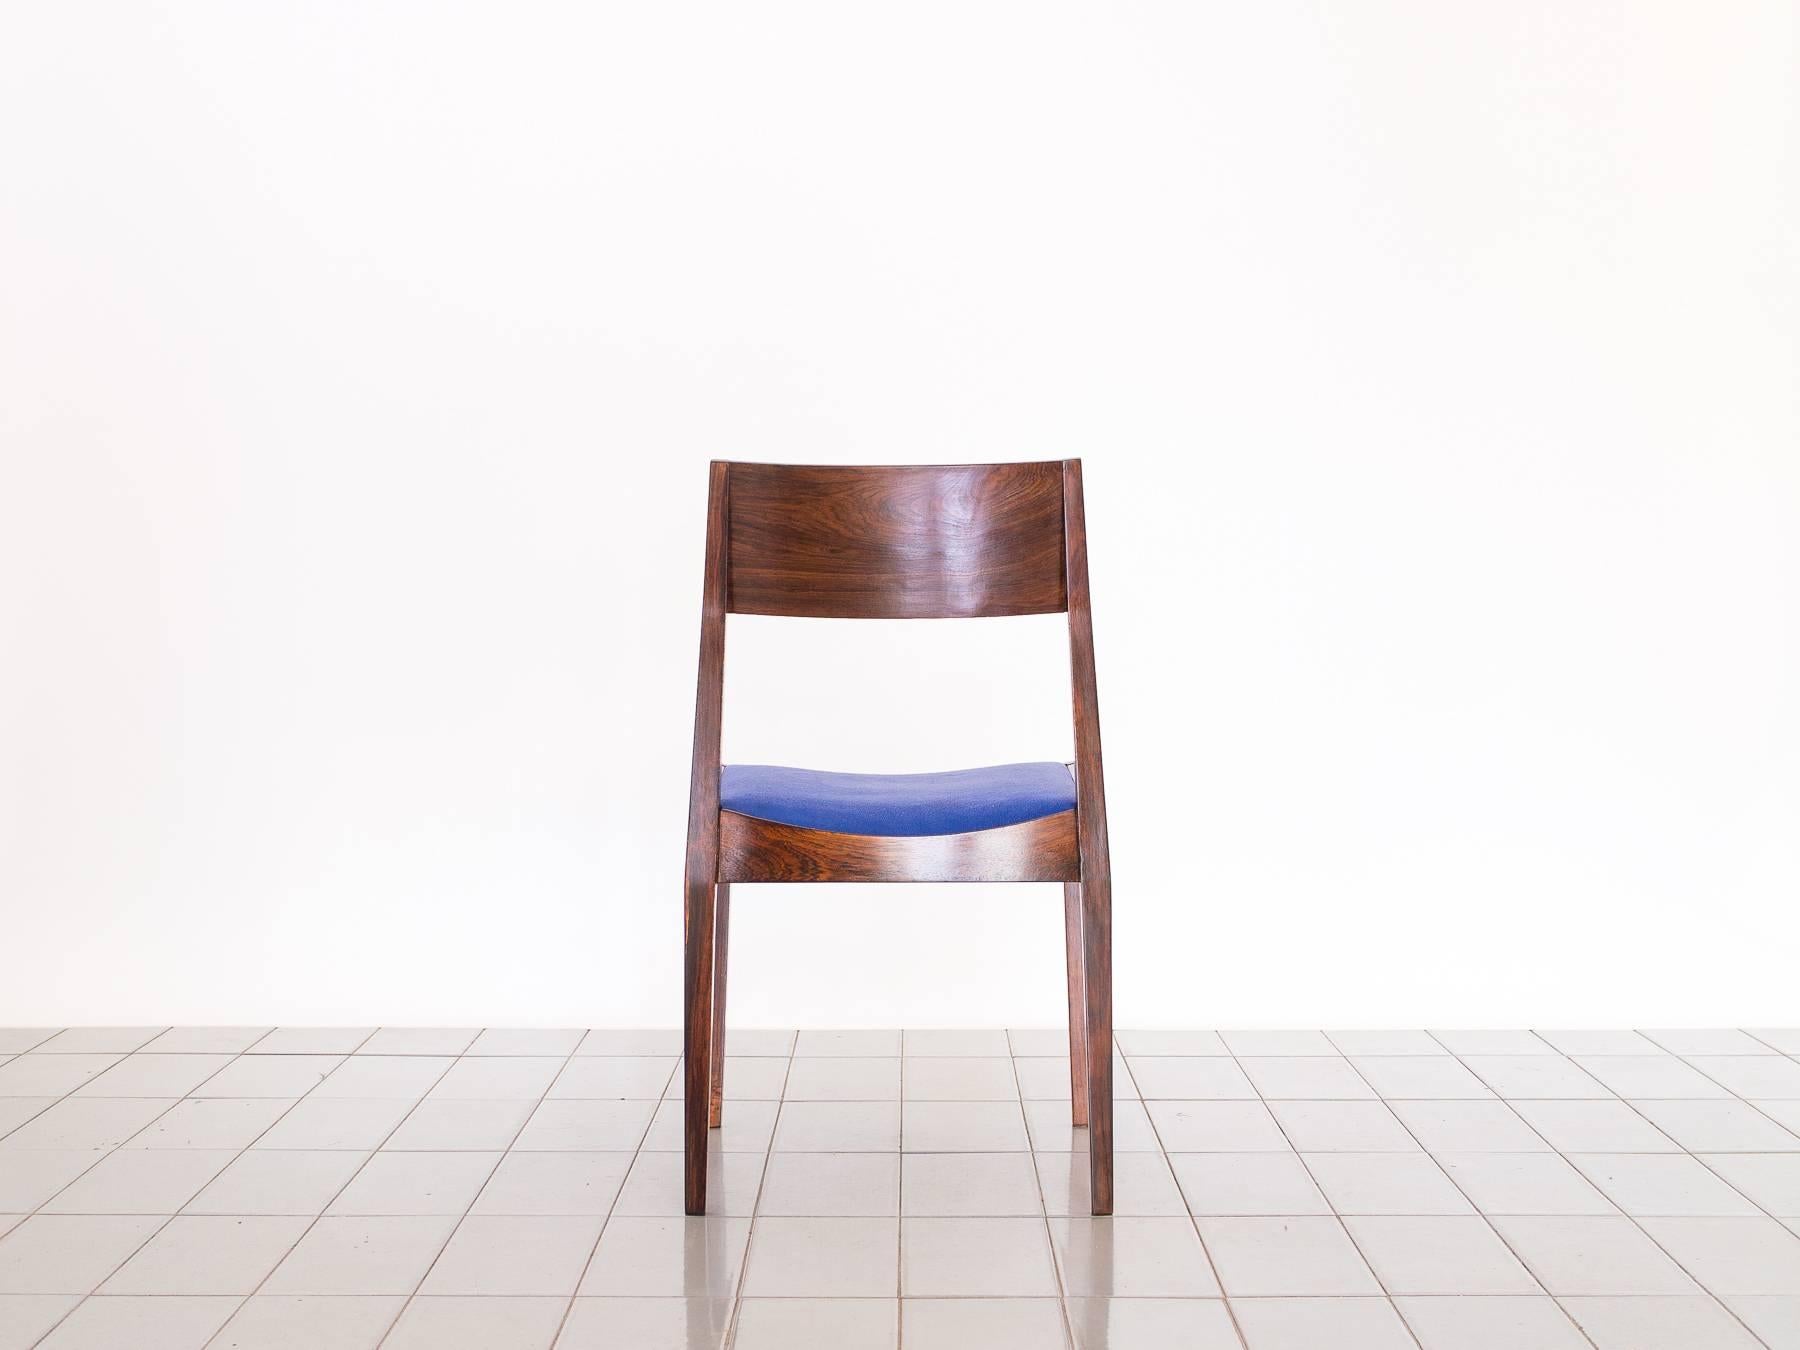 20th Century 1960s Set of Ten Rosewood Dining Chairs by Italo Bianchi, Brazilian Modernism